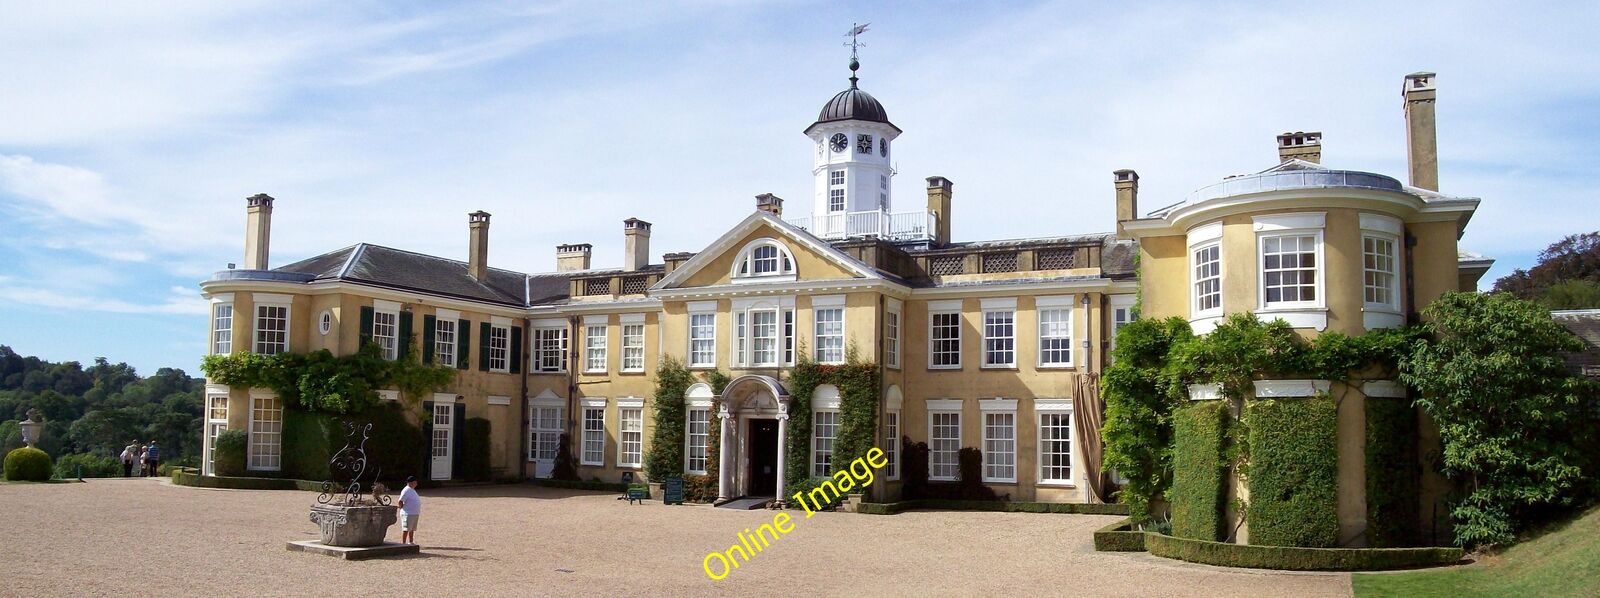 Photo 6x4 Polesden Lacey Polesden Lacey was rebuilt in 1908 by the Honour c2012